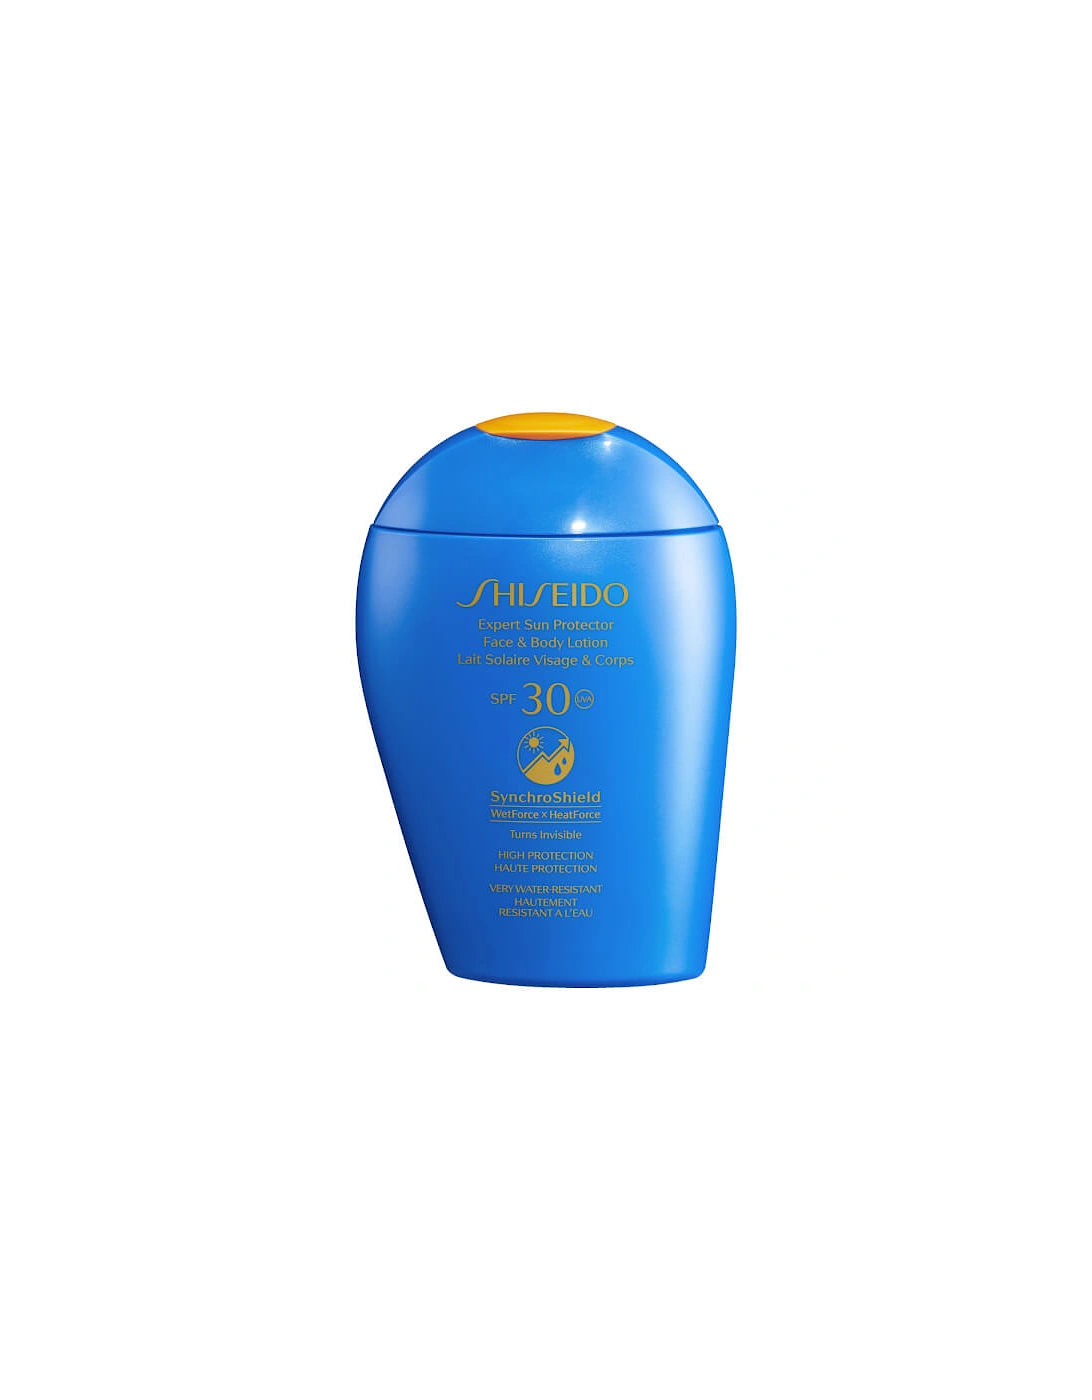 Expert Sun Protector Face And Body Lotion SPF30 - Shiseido, 2 of 1